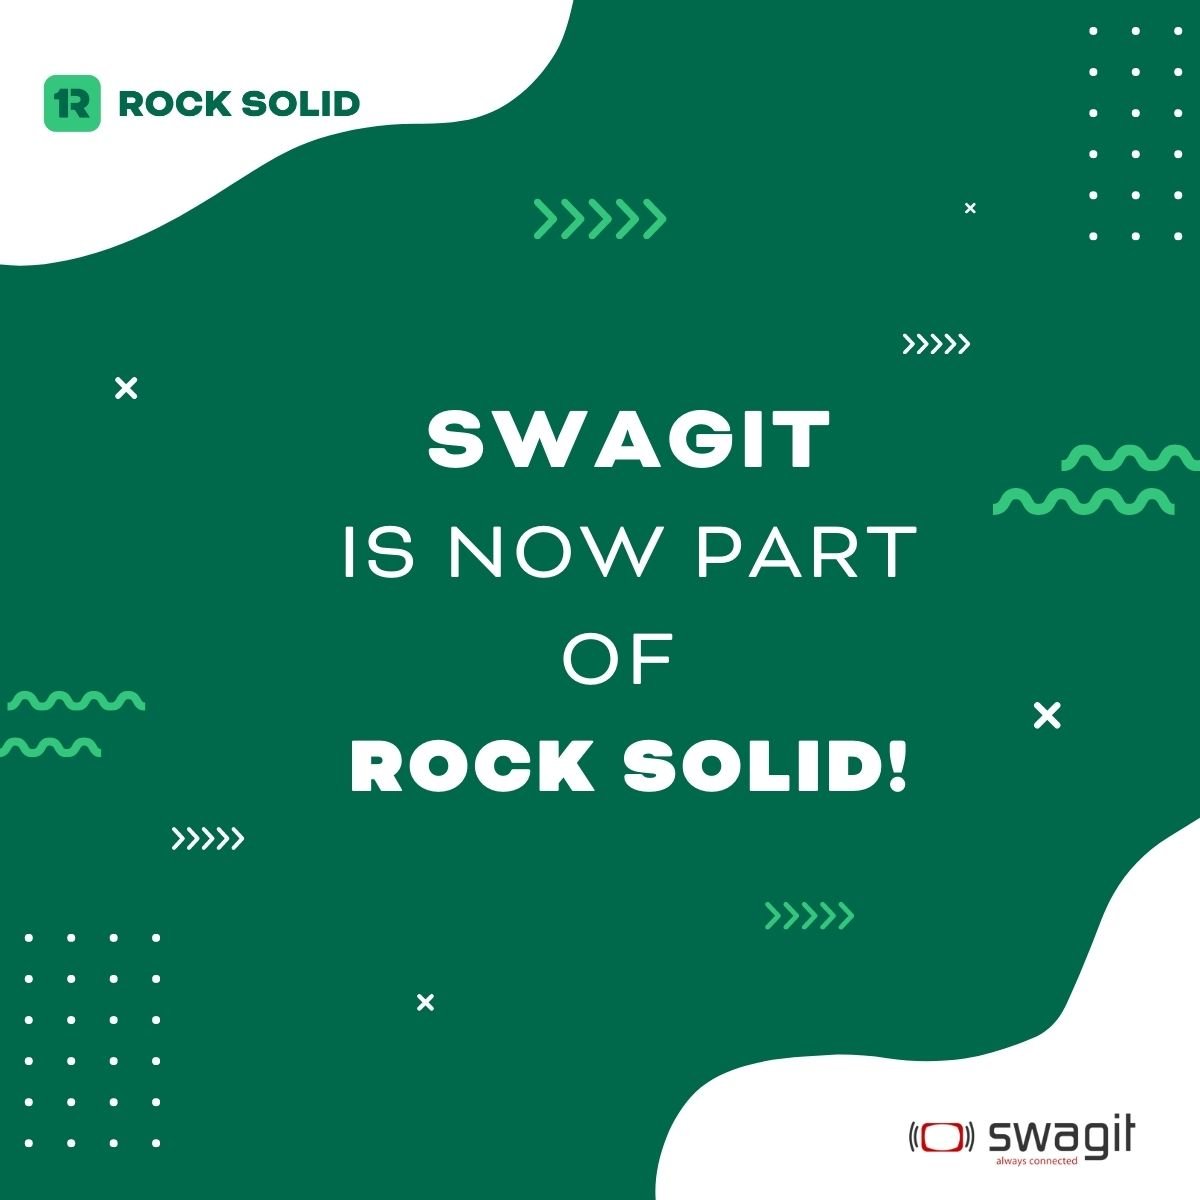 Swagit is now a part of rock solid